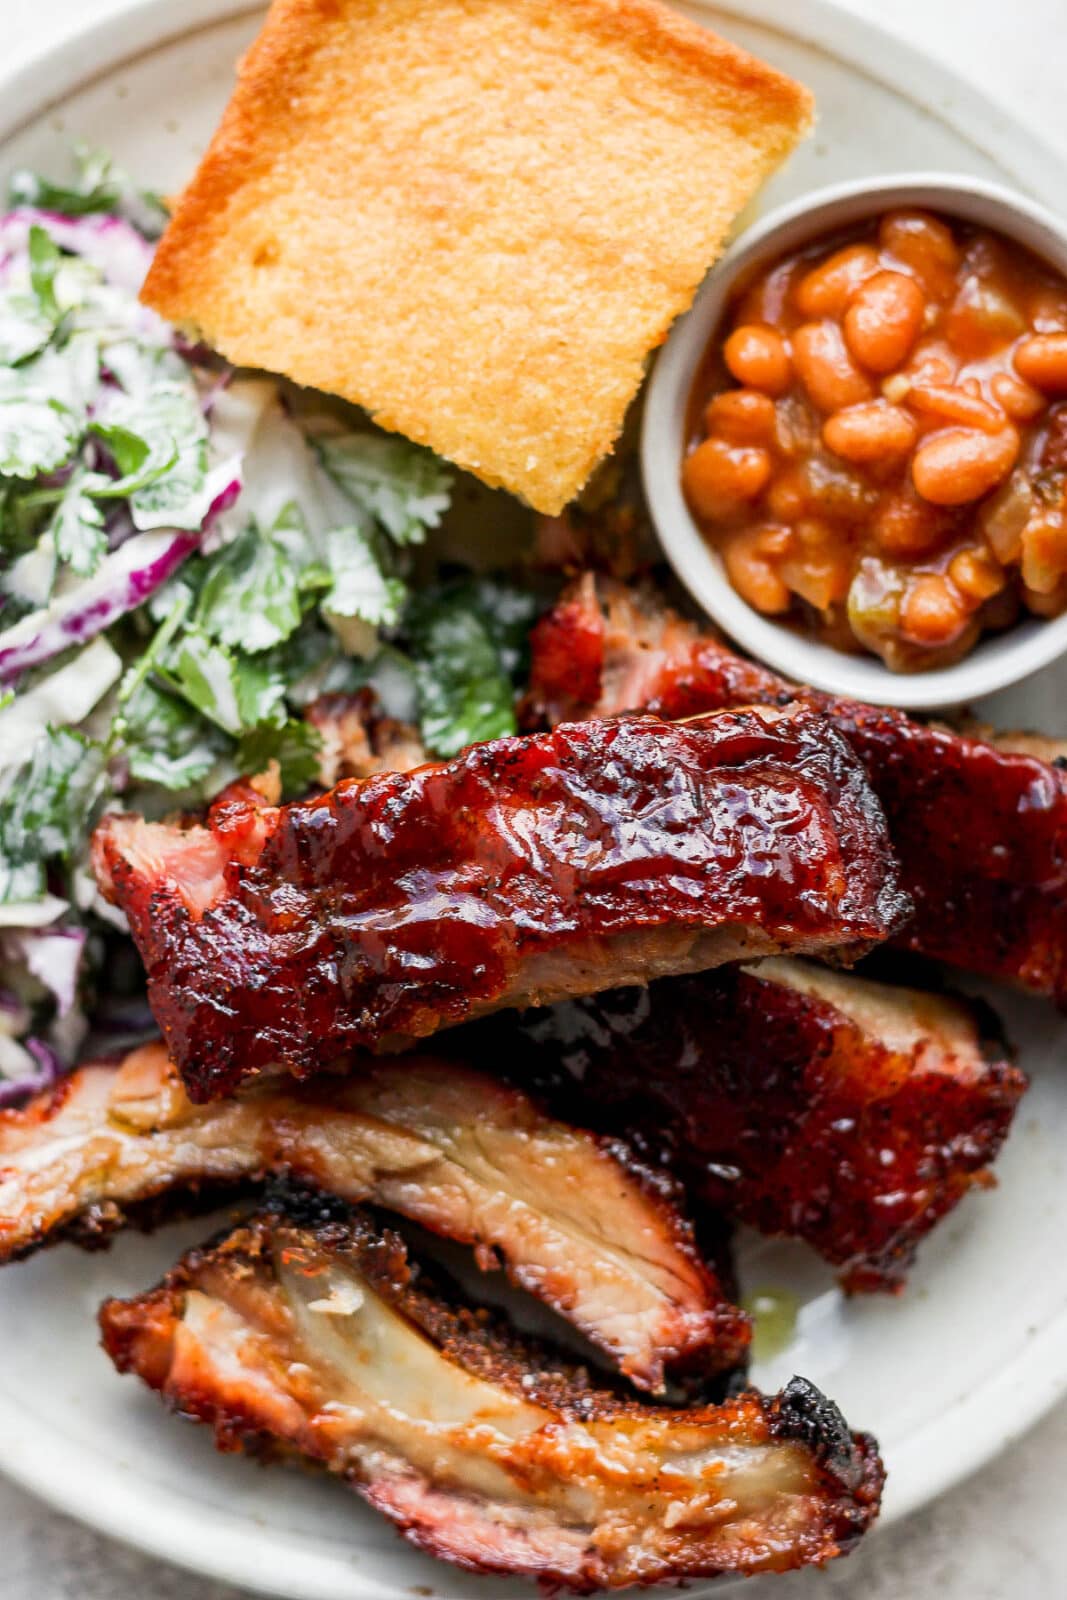 Smoked baby back ribs, smoked baked beans, cornbread, and spicy purple cabbage coleslaw on a plate.